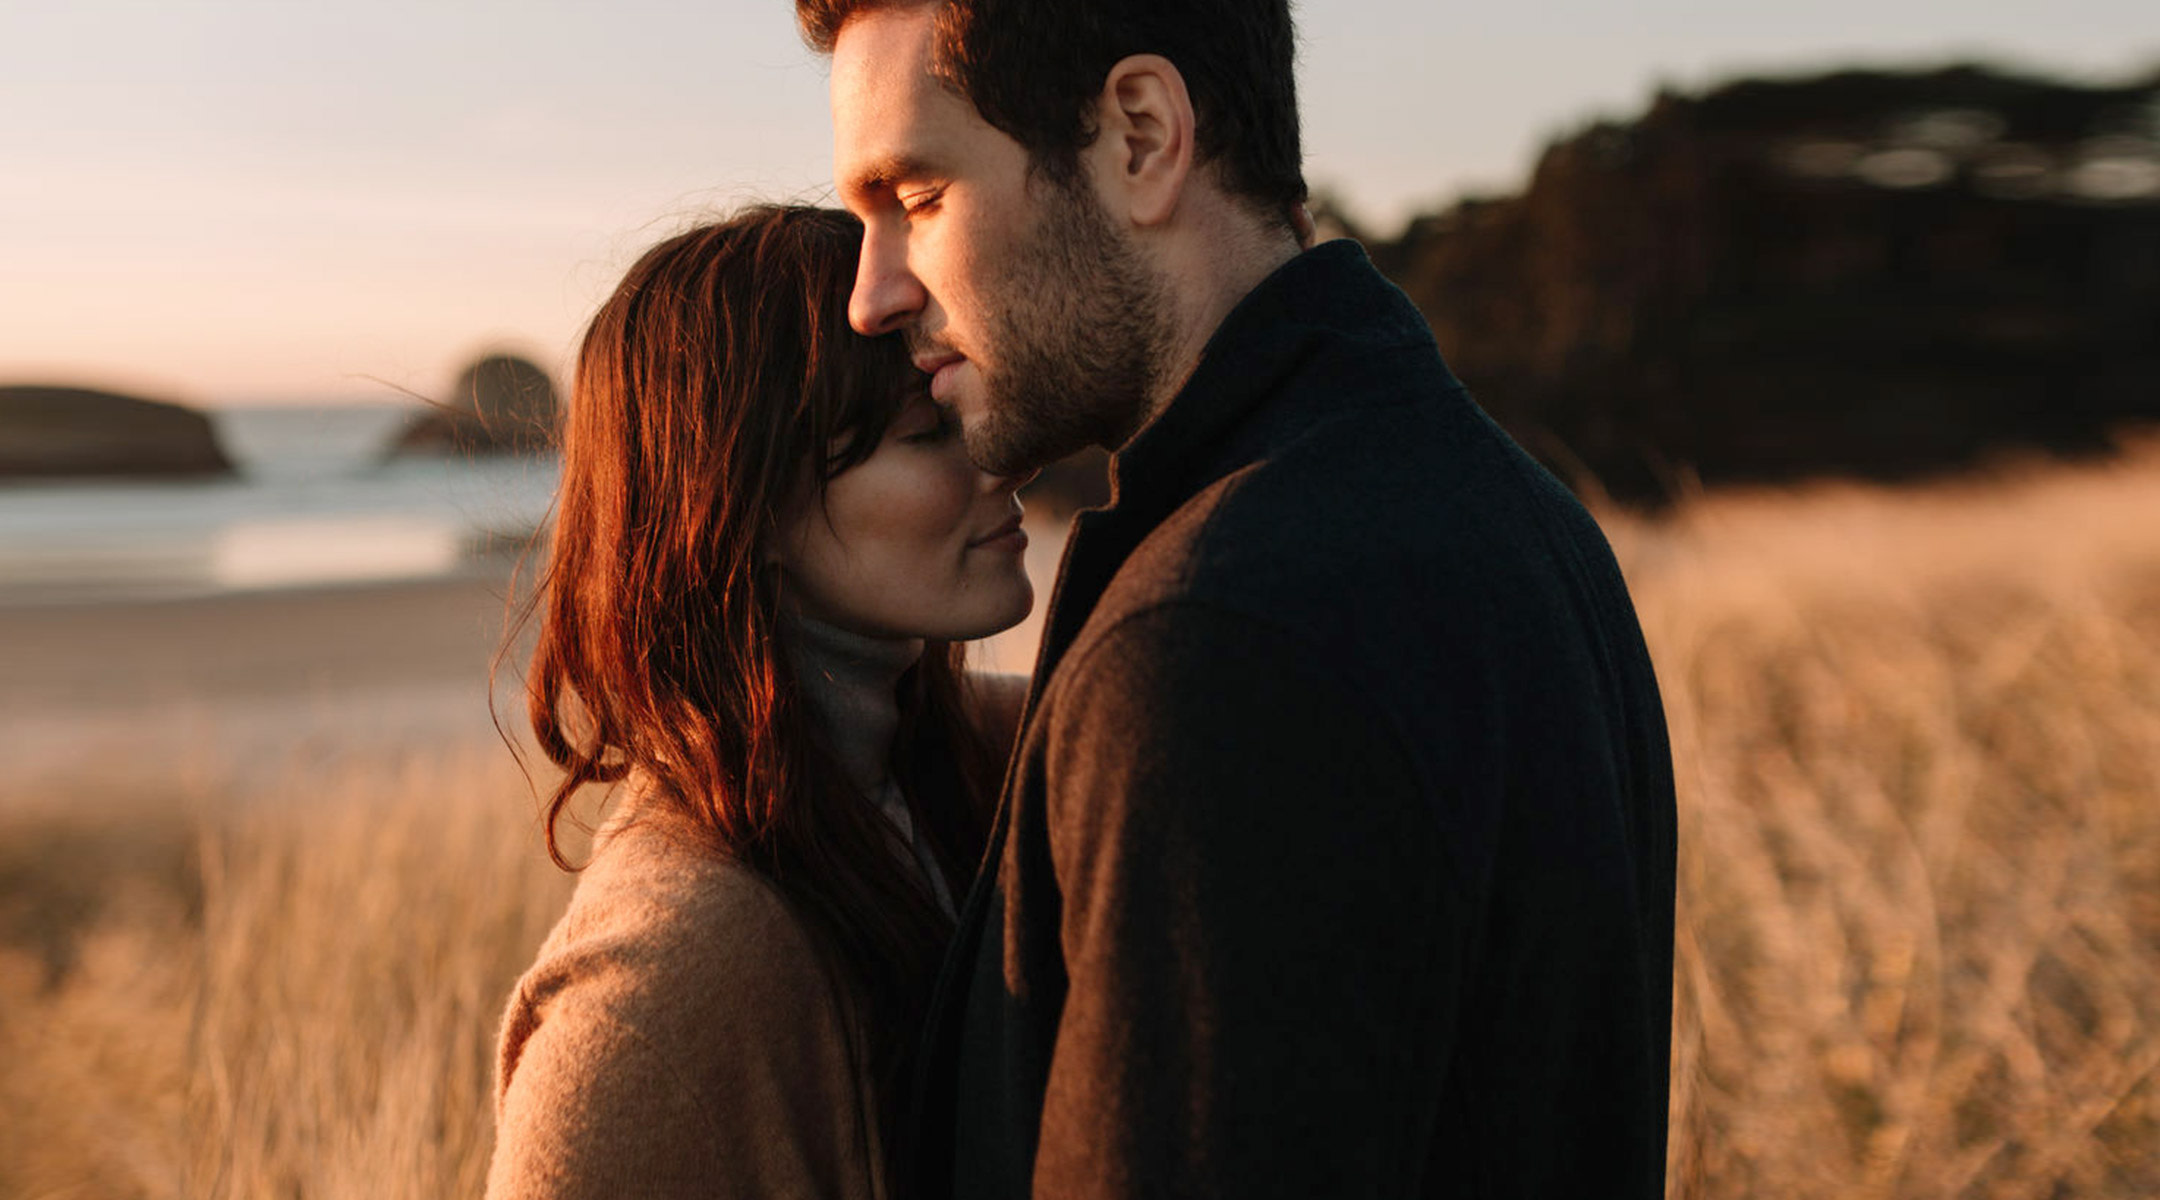 contemplative couple embraces in beautiful outdoor scenery 